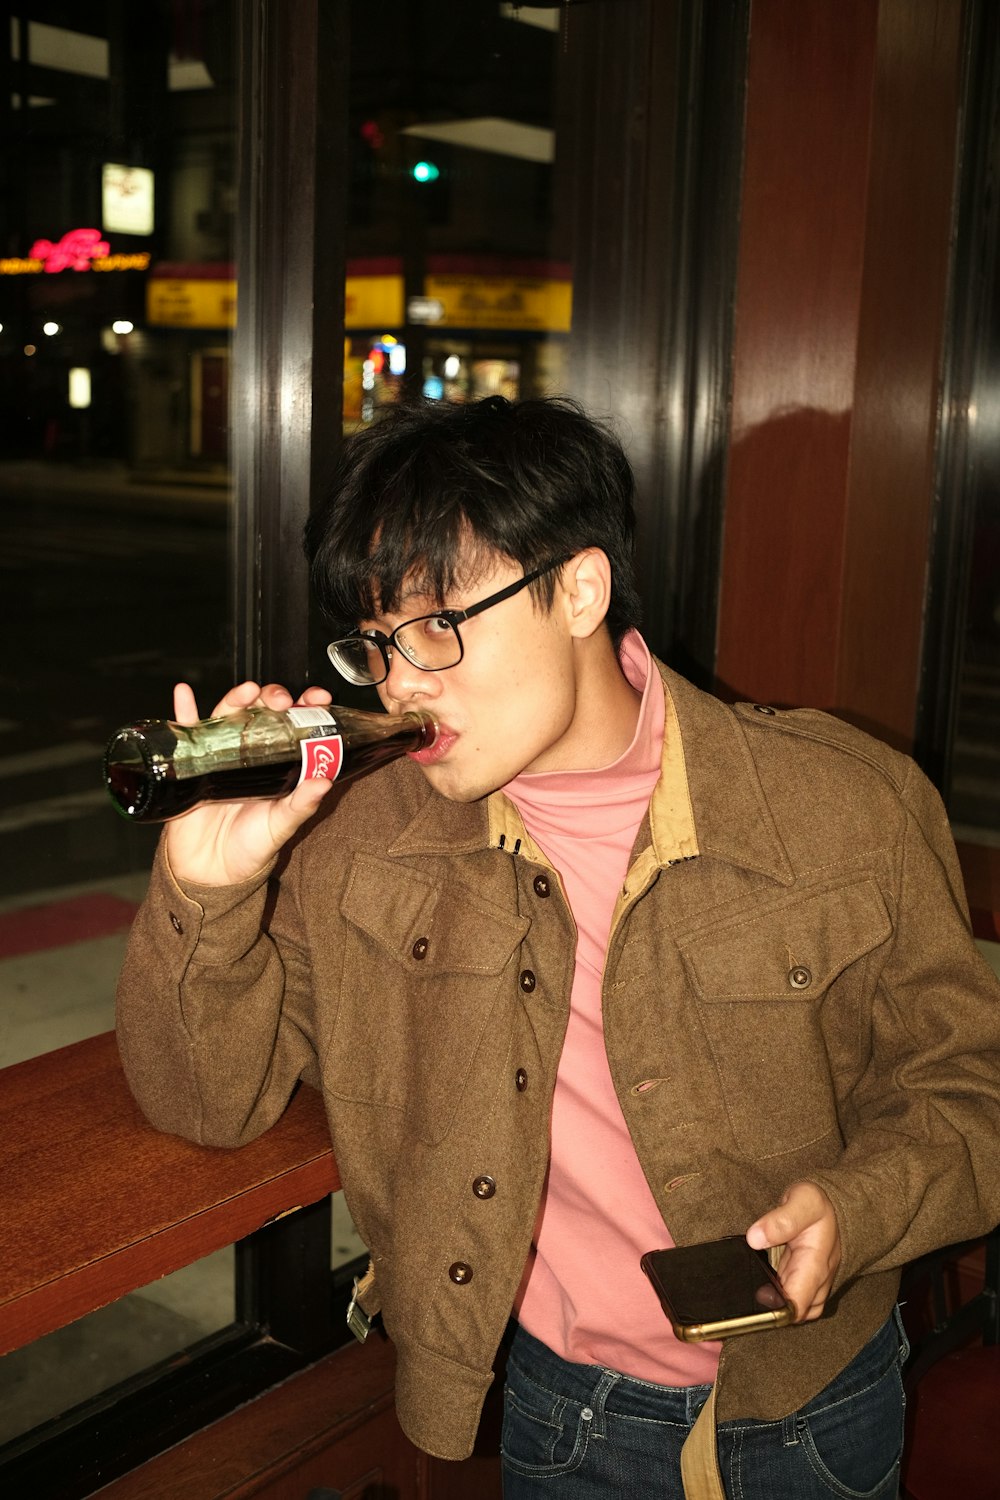 a man drinking from a bottle of wine